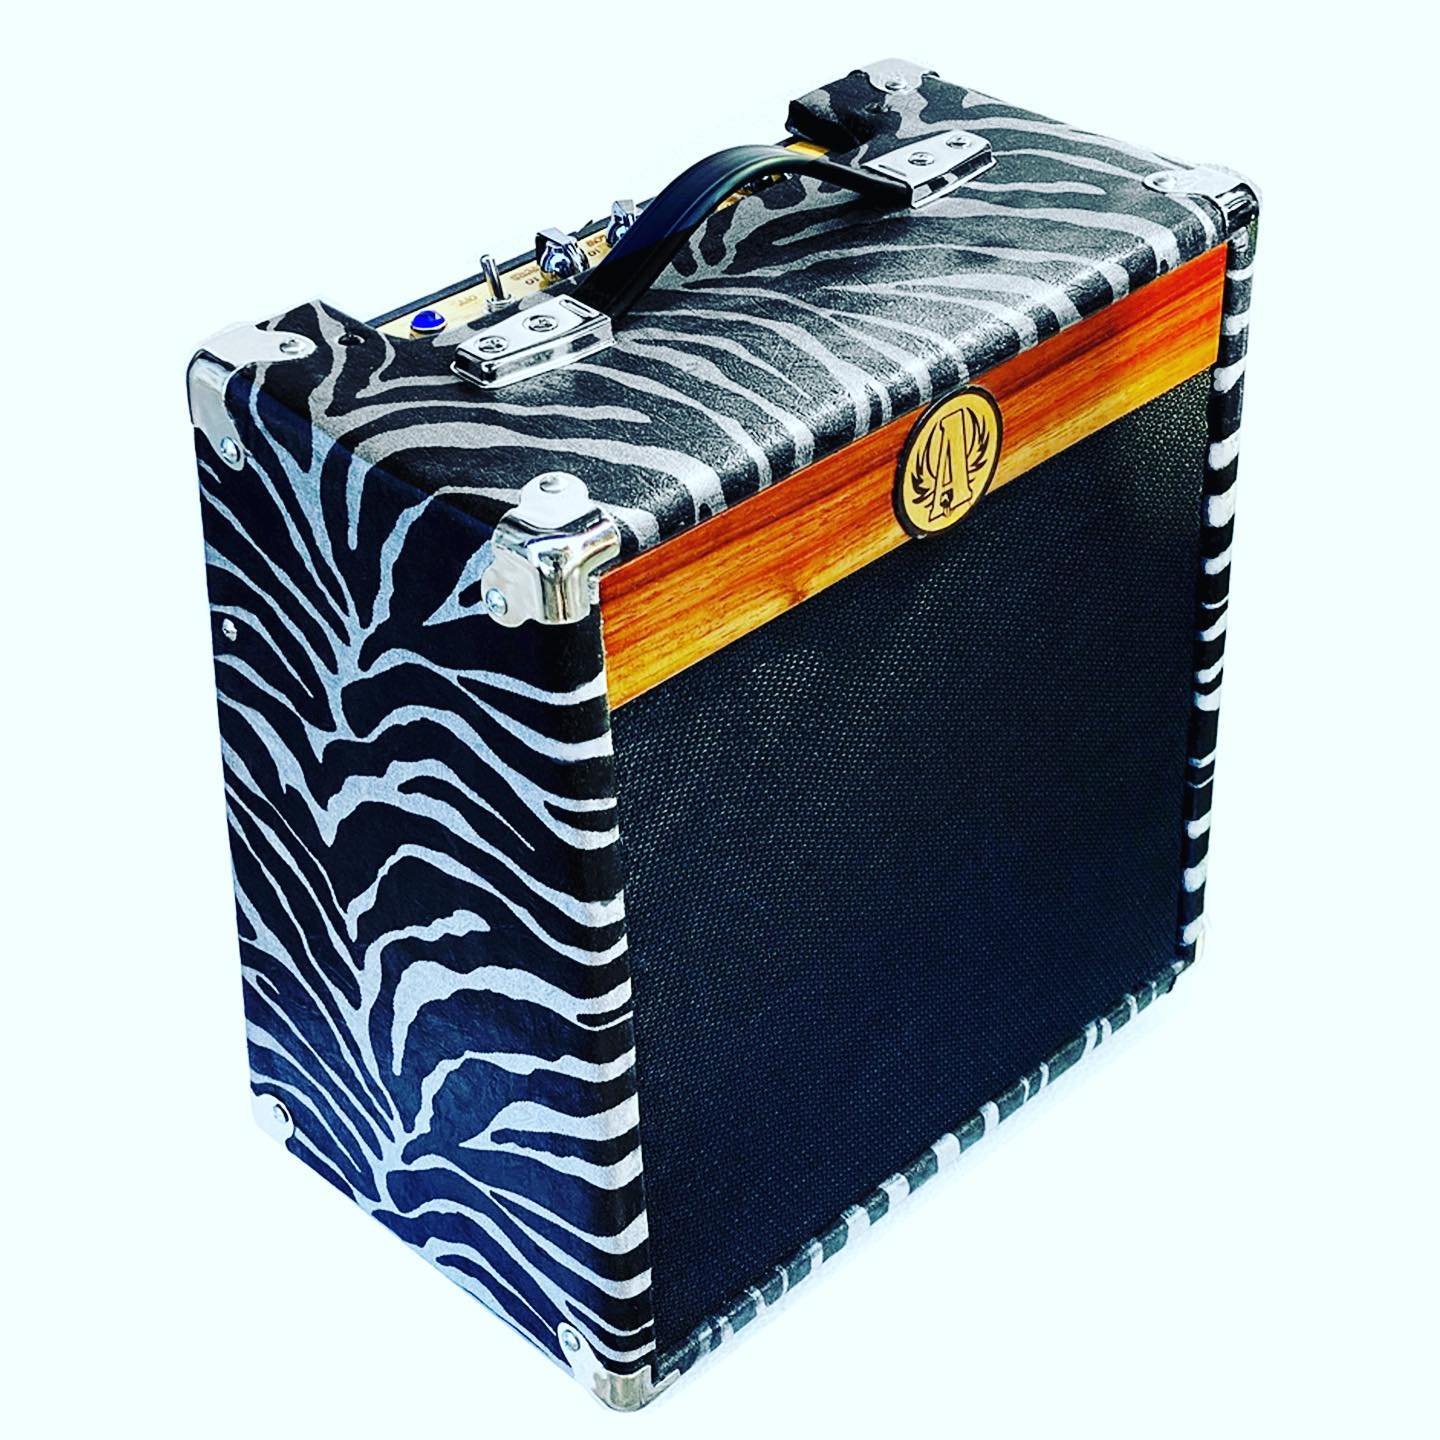 🎸🔊 Looking for a unique and great-sounding tube guitar amplifier combo? Look no further! Our custom handmade masterpiece is ready to ship and built in only one copy. Join the ranks of our satisfied customers who are loving every moment of playing w